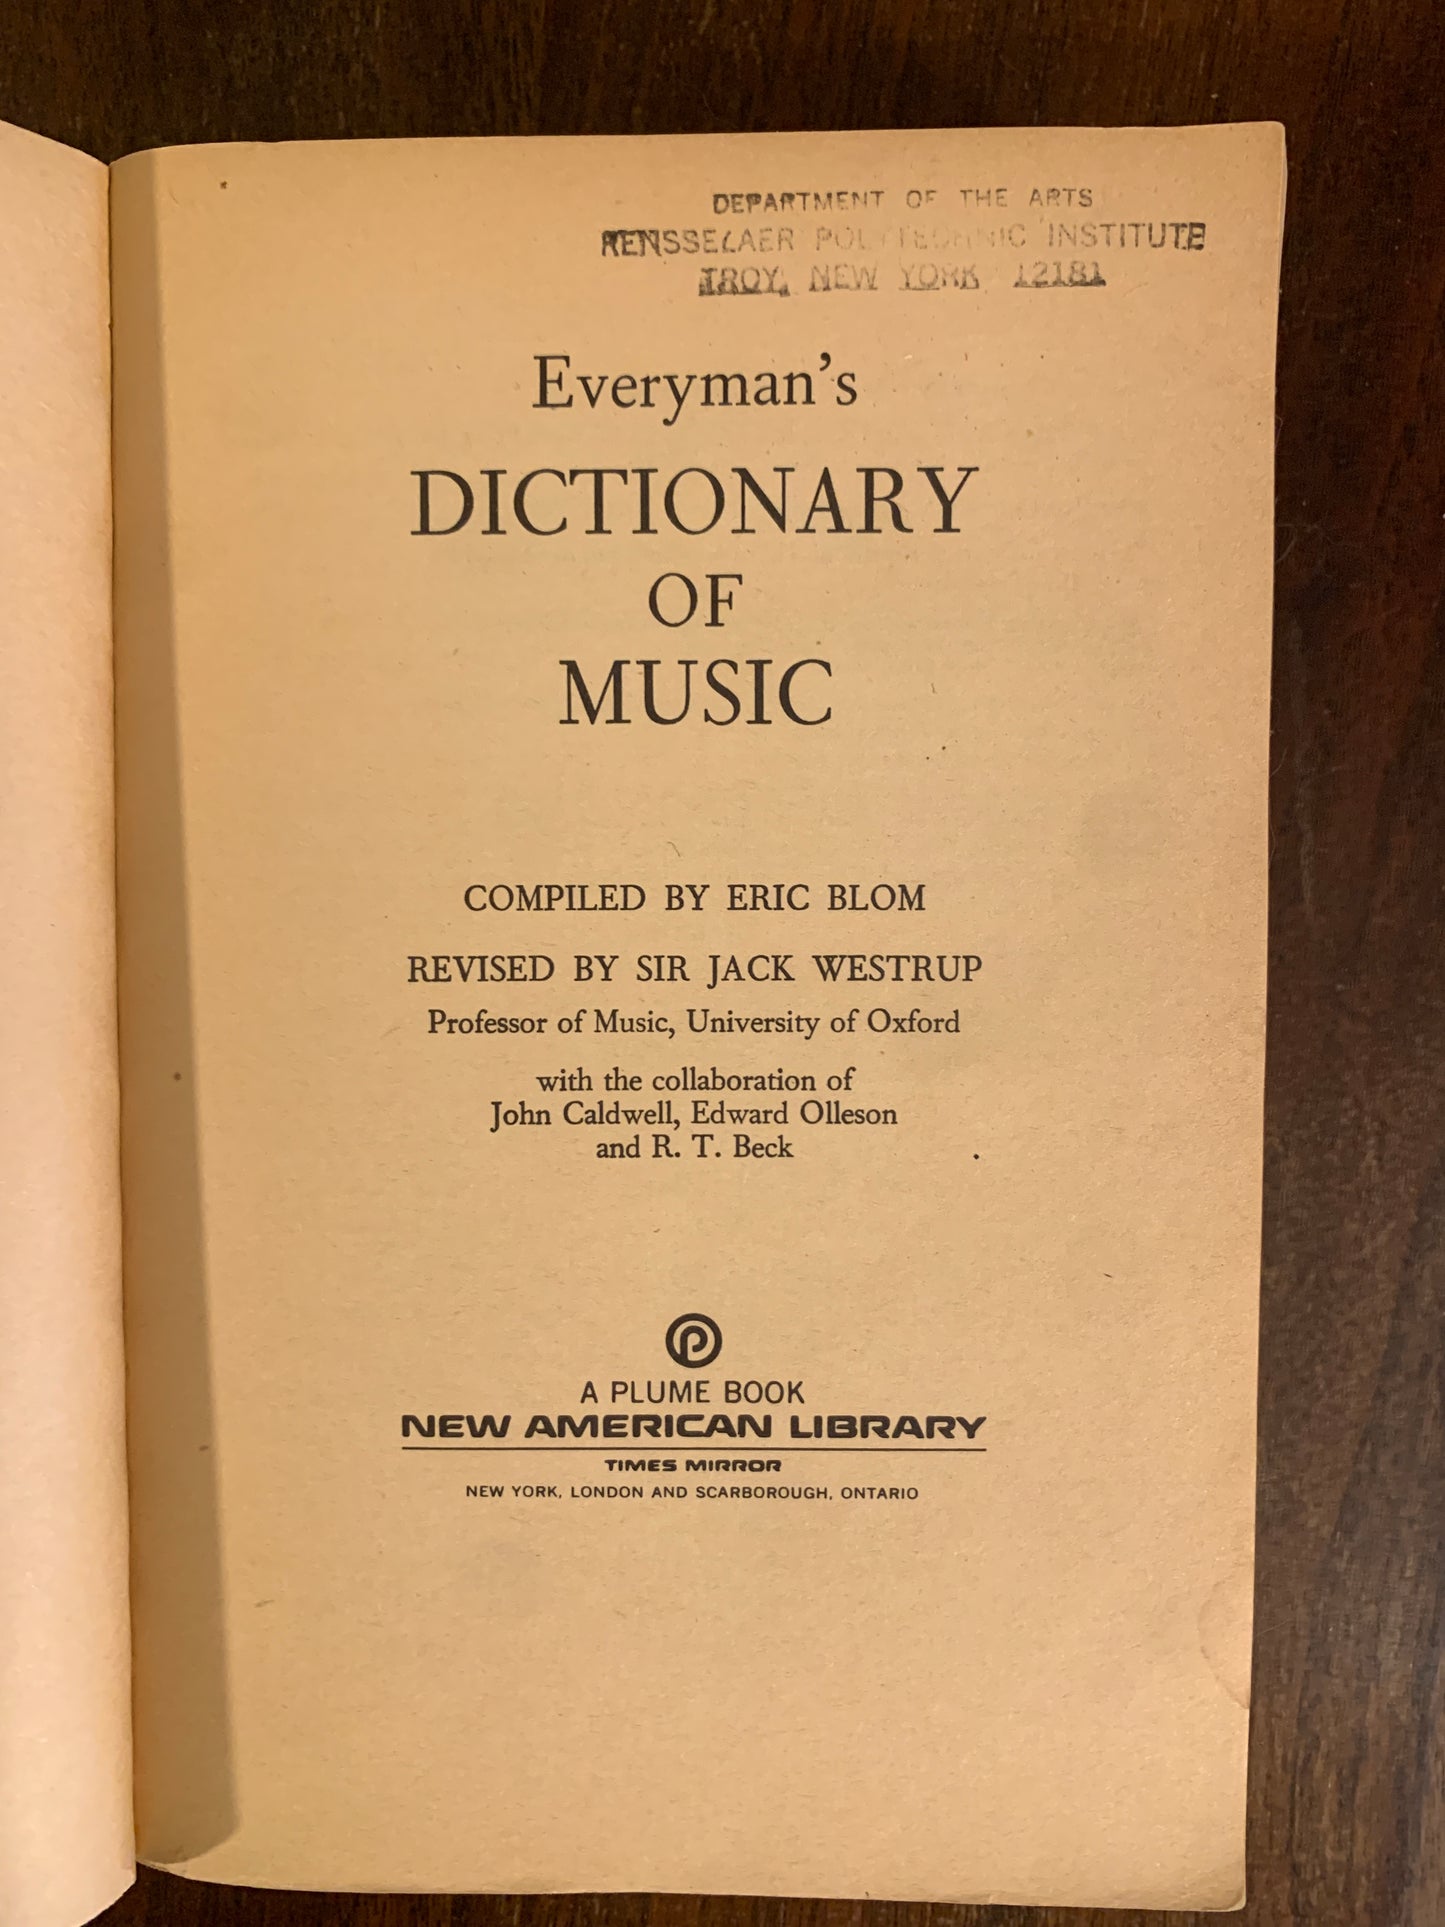 Everyman's Dictionary of Music by Eric Blom 1973